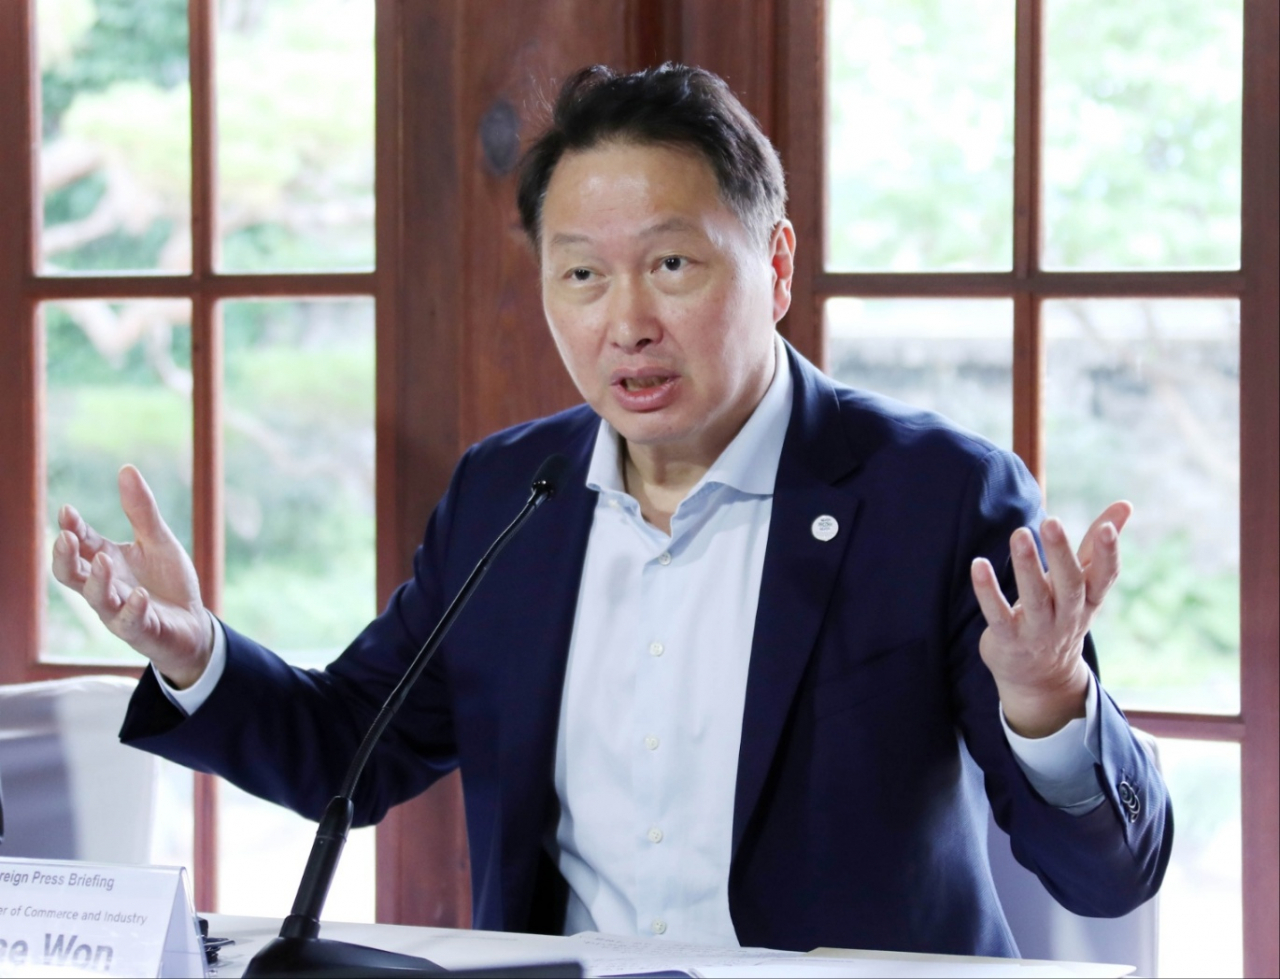 SK Group Chairman Chey Tae-won, who doubles as chairman of the Korea Chamber of Commerce and Industry, speaks during a press conference on Busan's bid for hosting the World Expo 2030 in Bukchon, central Seoul, Wednesday. (KCCI)